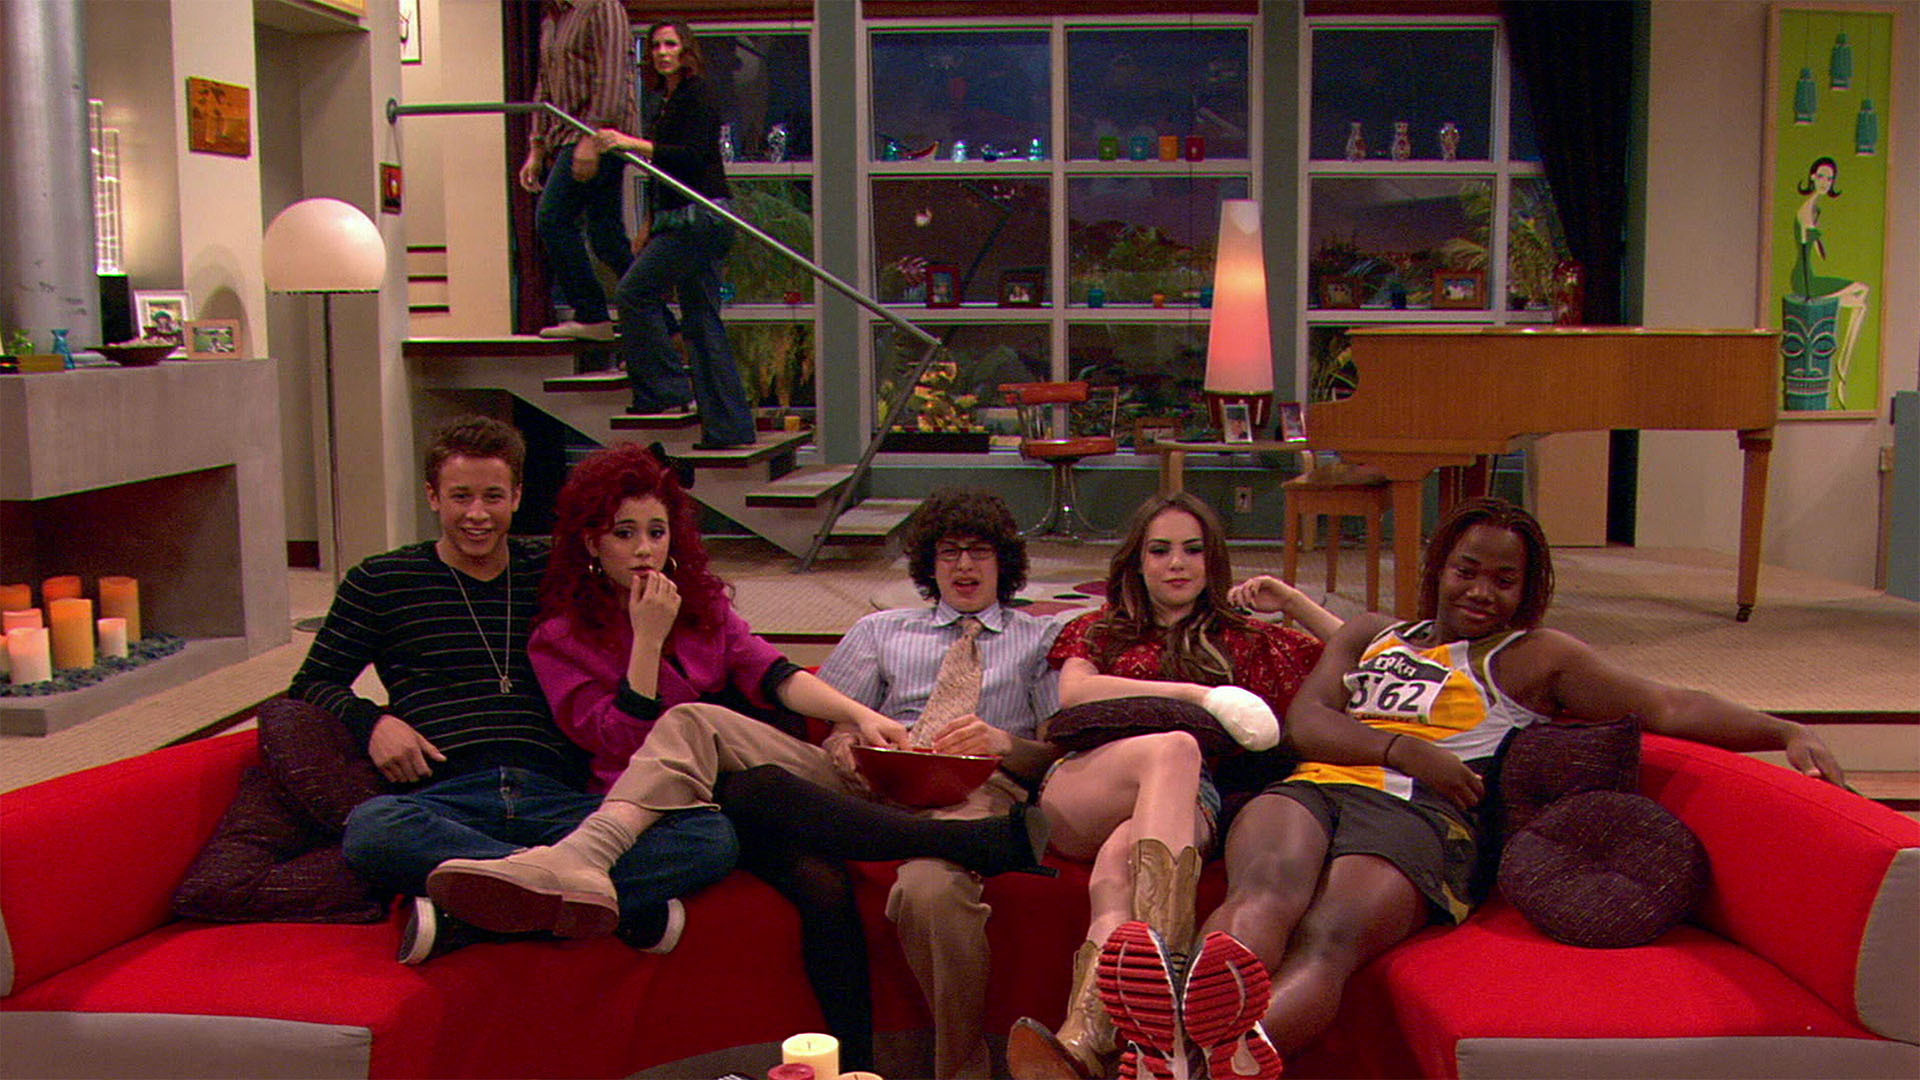 NICKELODEON VICTORIOUS 113 HD 264430 1920x1080 